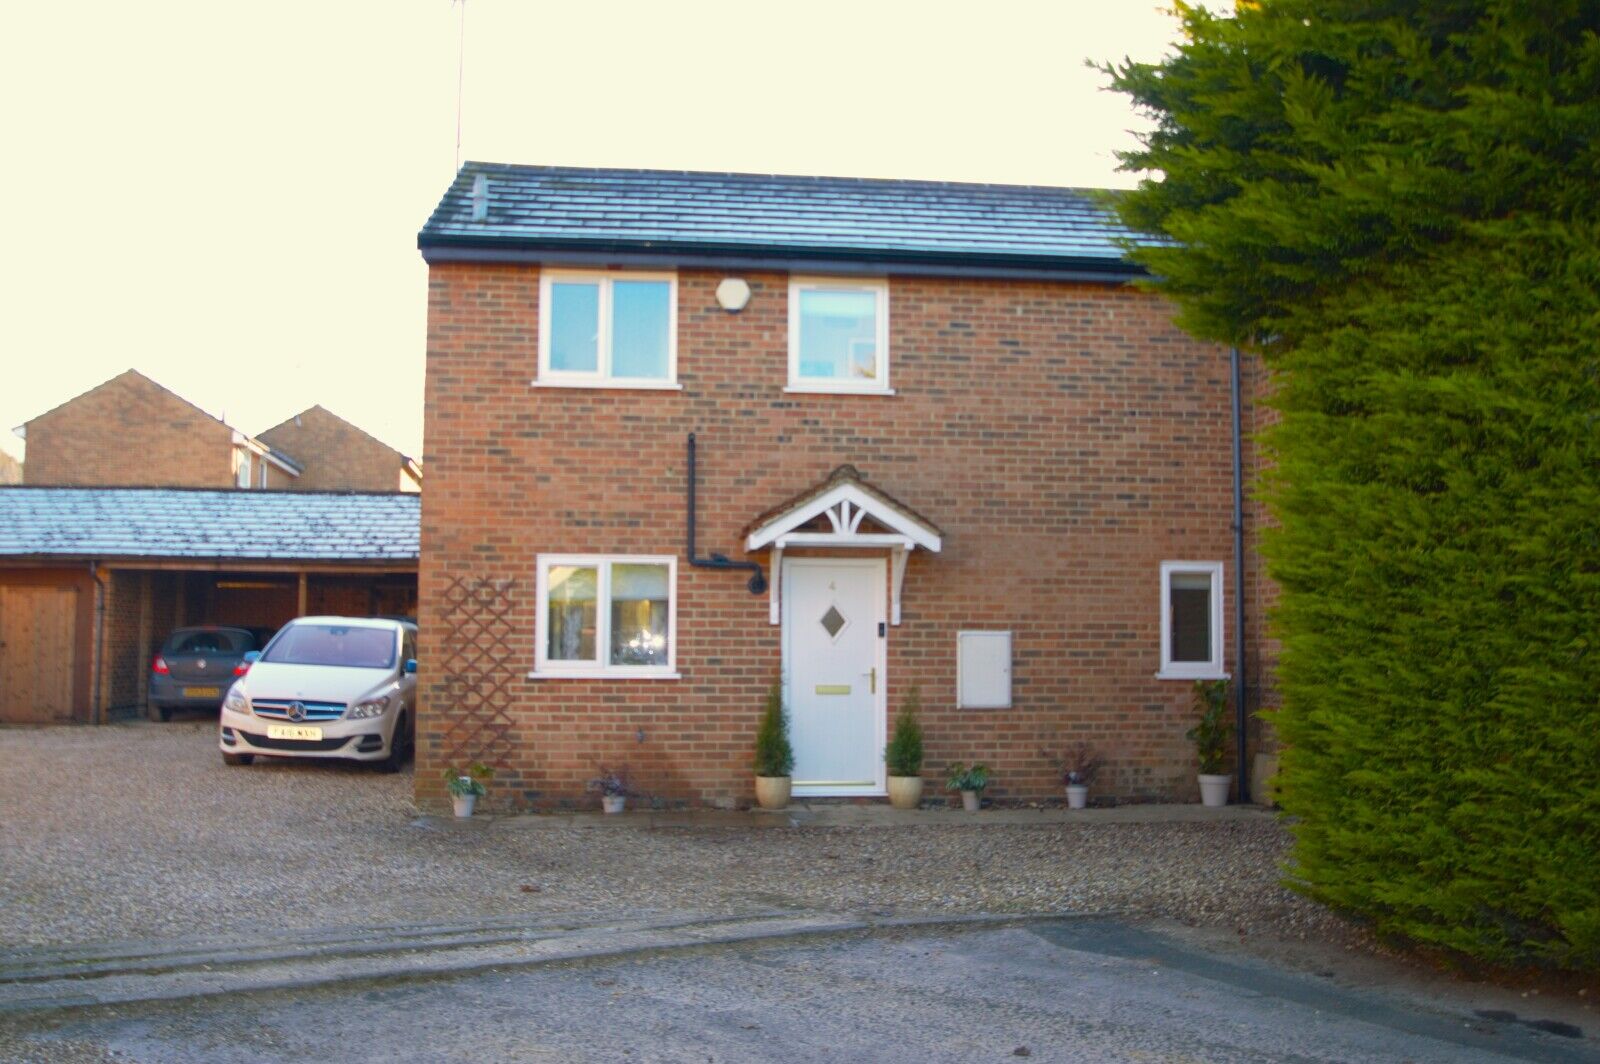 3 bedroom semi detached house for sale Beckley Close, Woodcote, RG8, main image